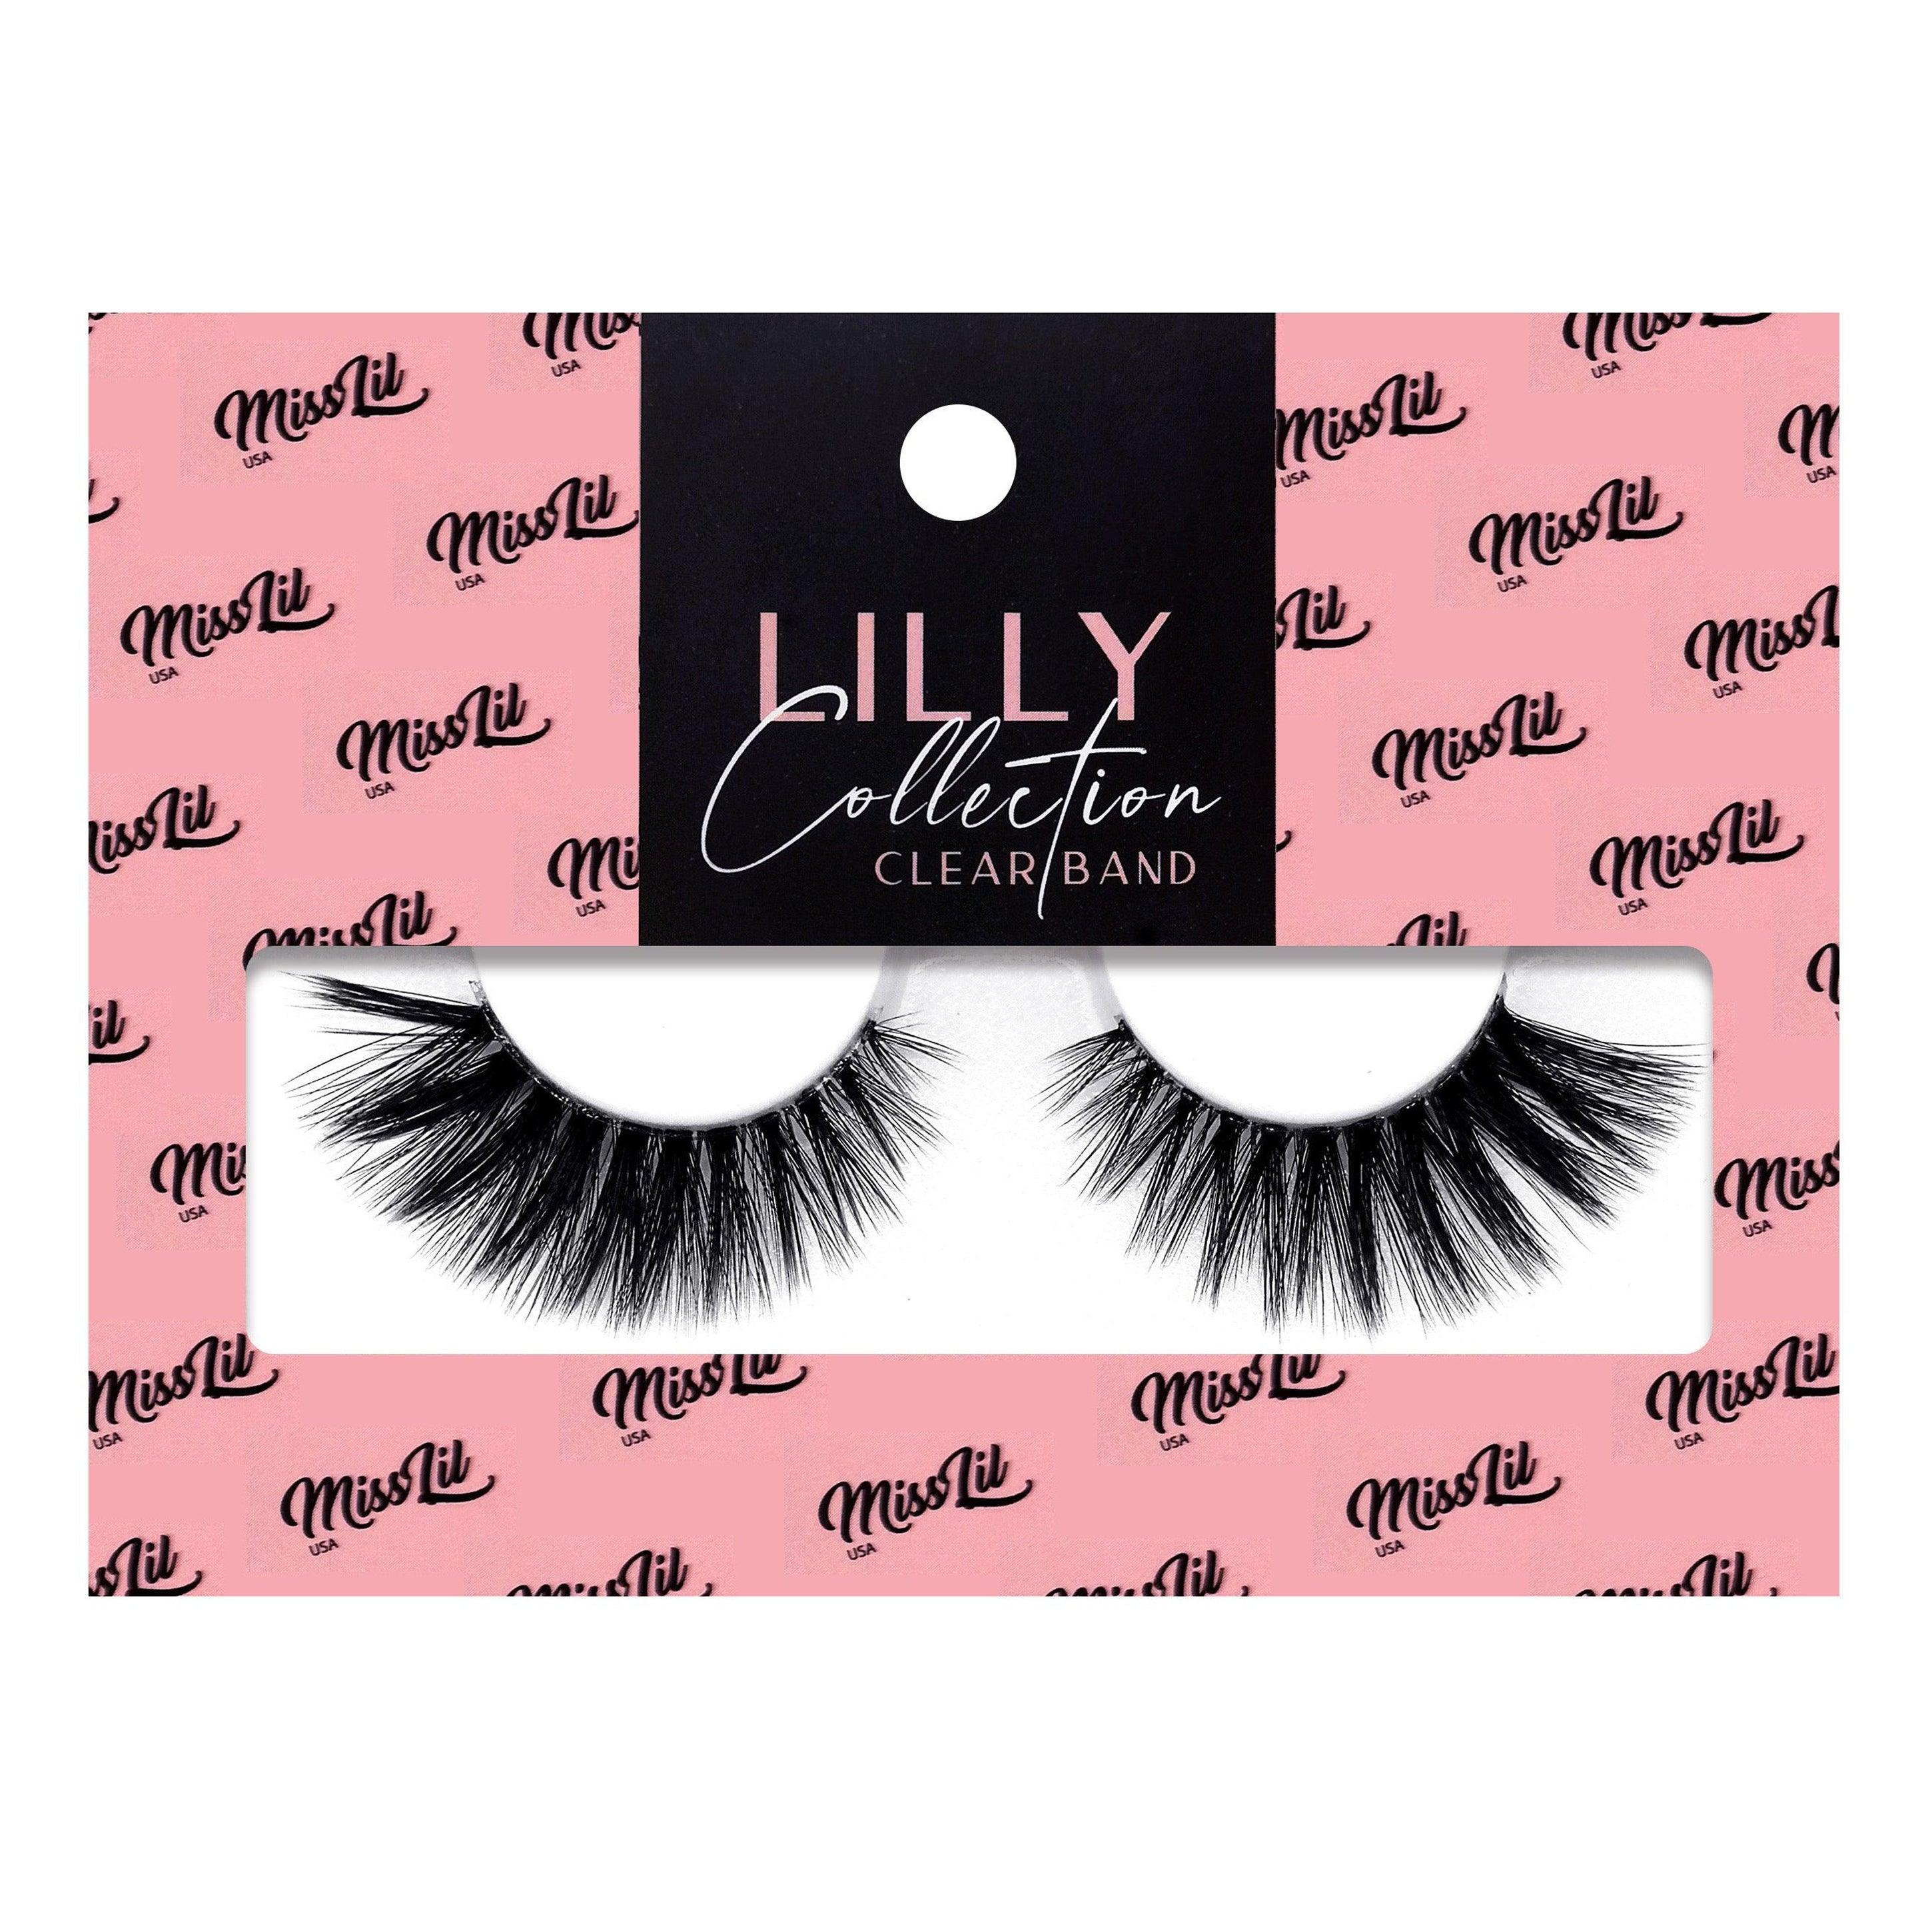 1-Pair Lashes-Lilly Collection #2 (Pack of 12) - Miss Lil USA Wholesale